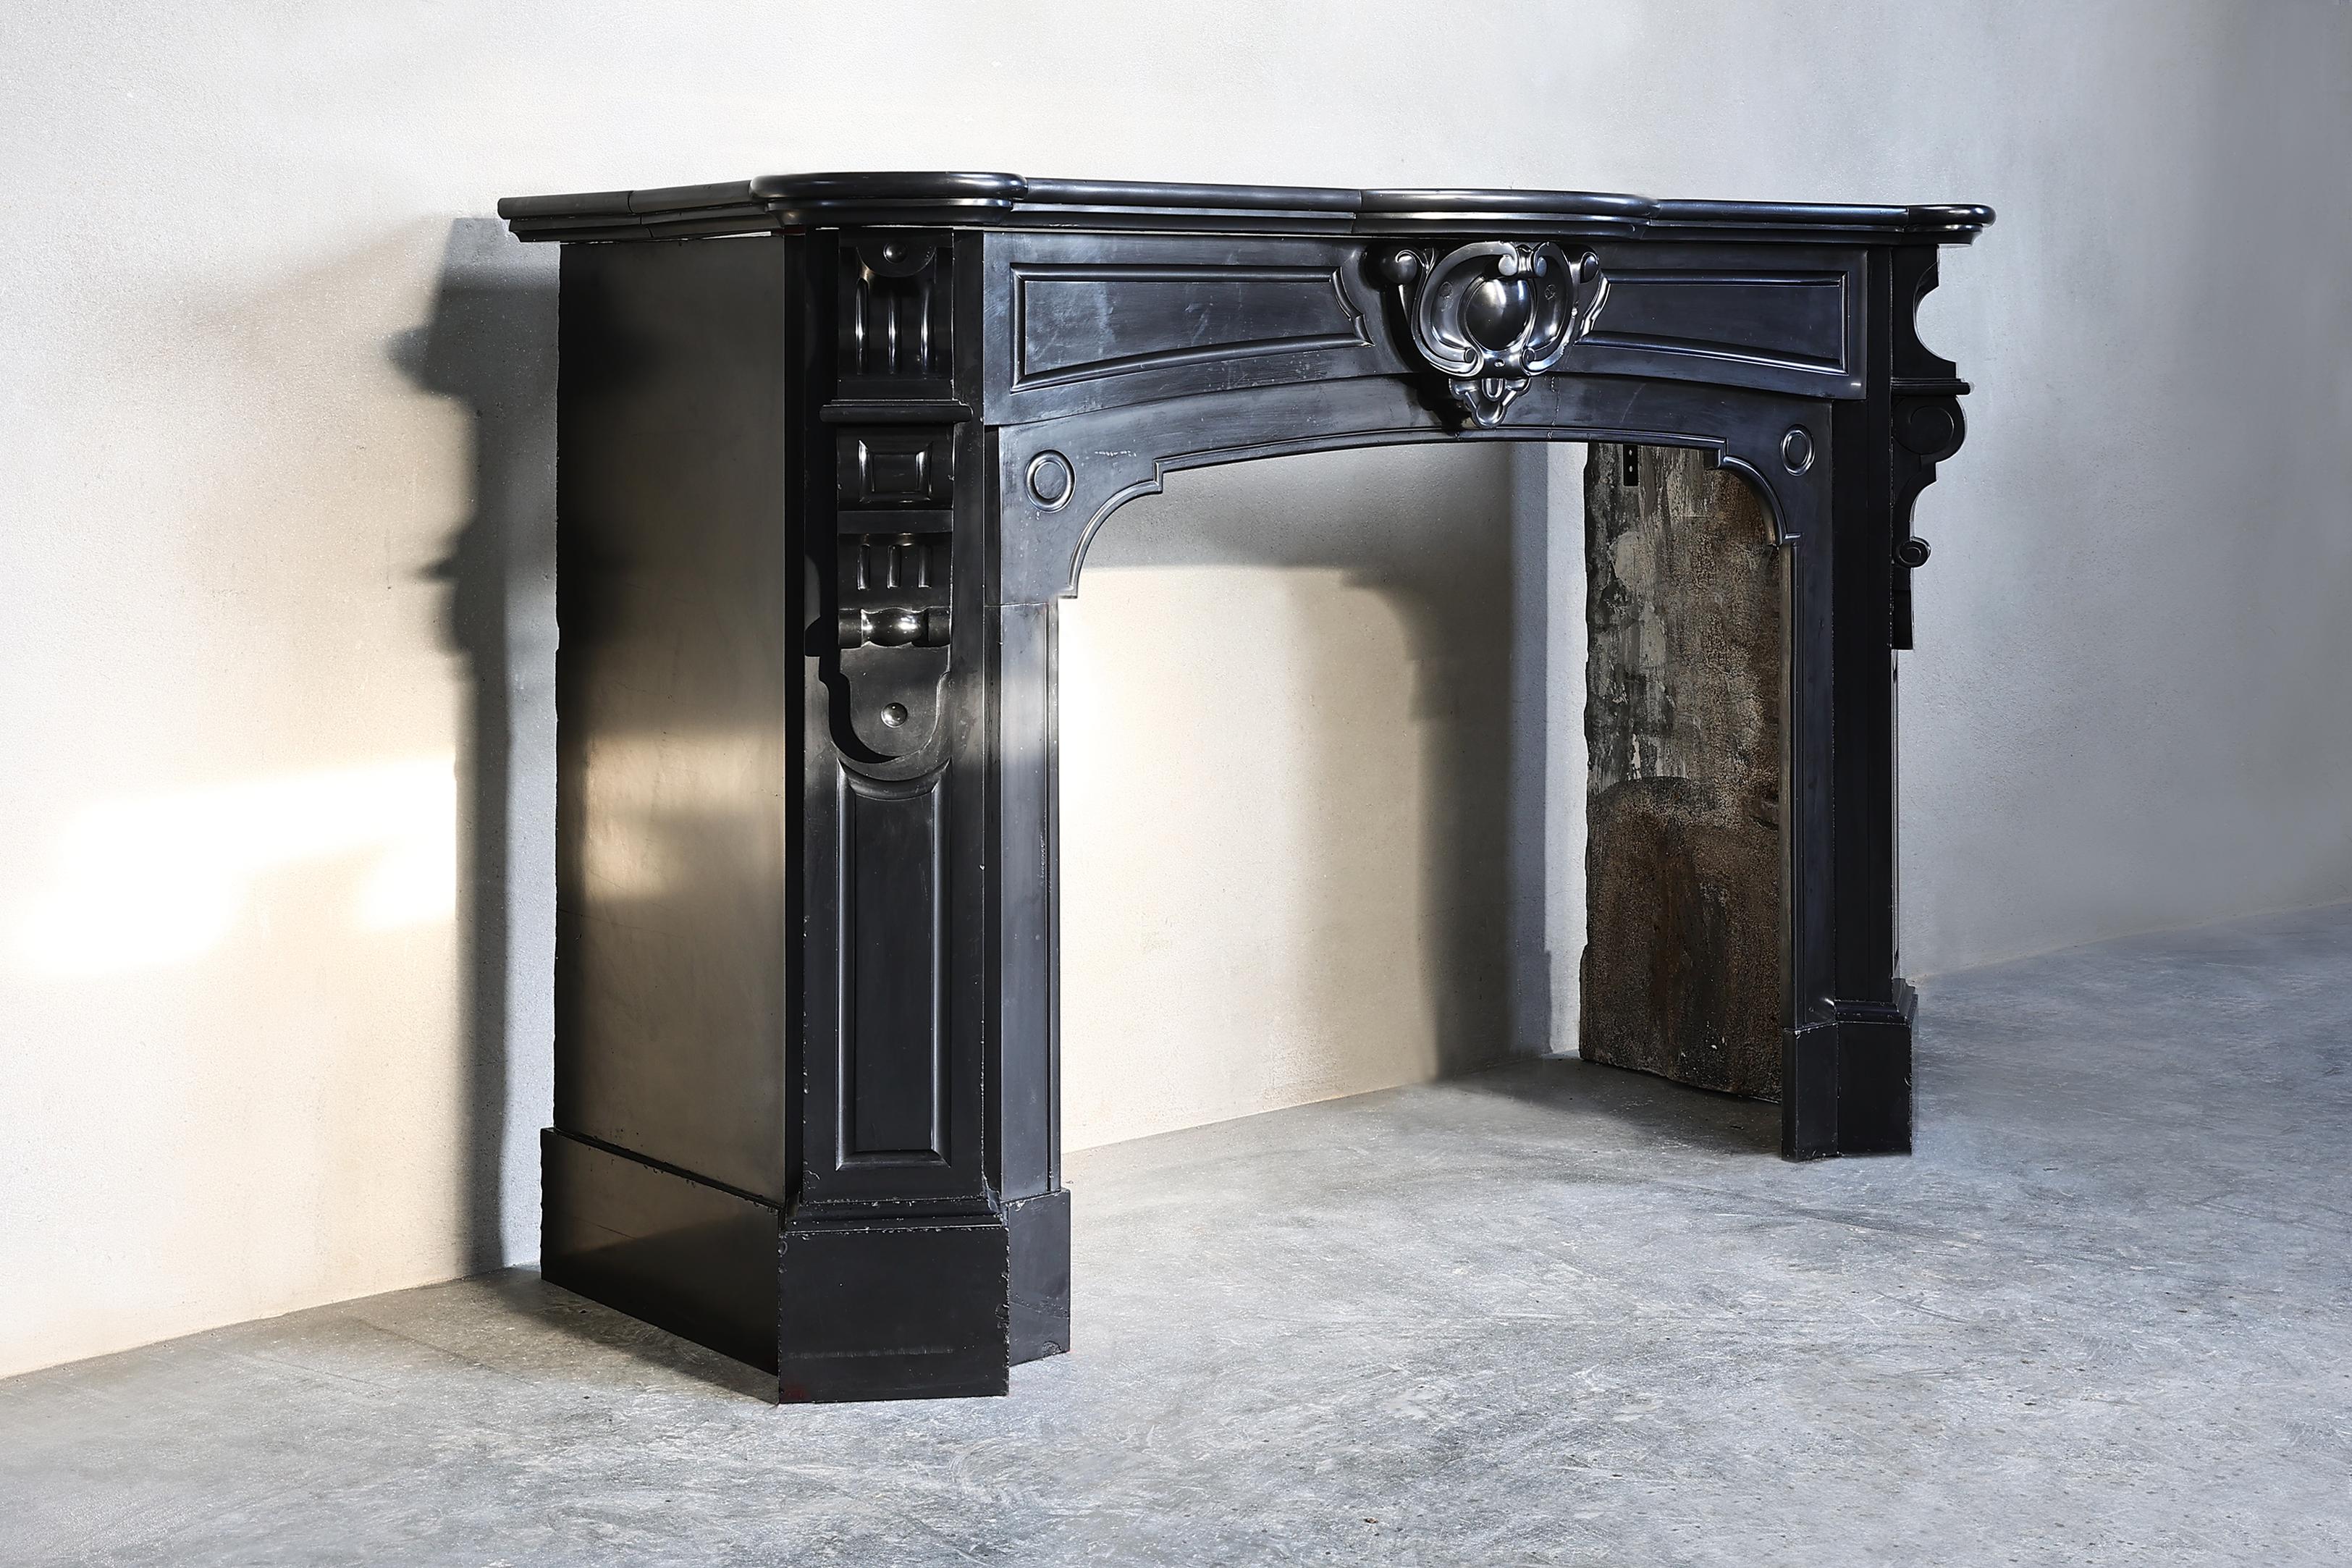 Very nice antique fireplace of Noir de Mazy marble from the 19th century. This fireplace is in the style of Louis XIV and has beautiful ornate ornaments incorporated in the fireplace! A graceful chic fireplace with appearance and allure that fits